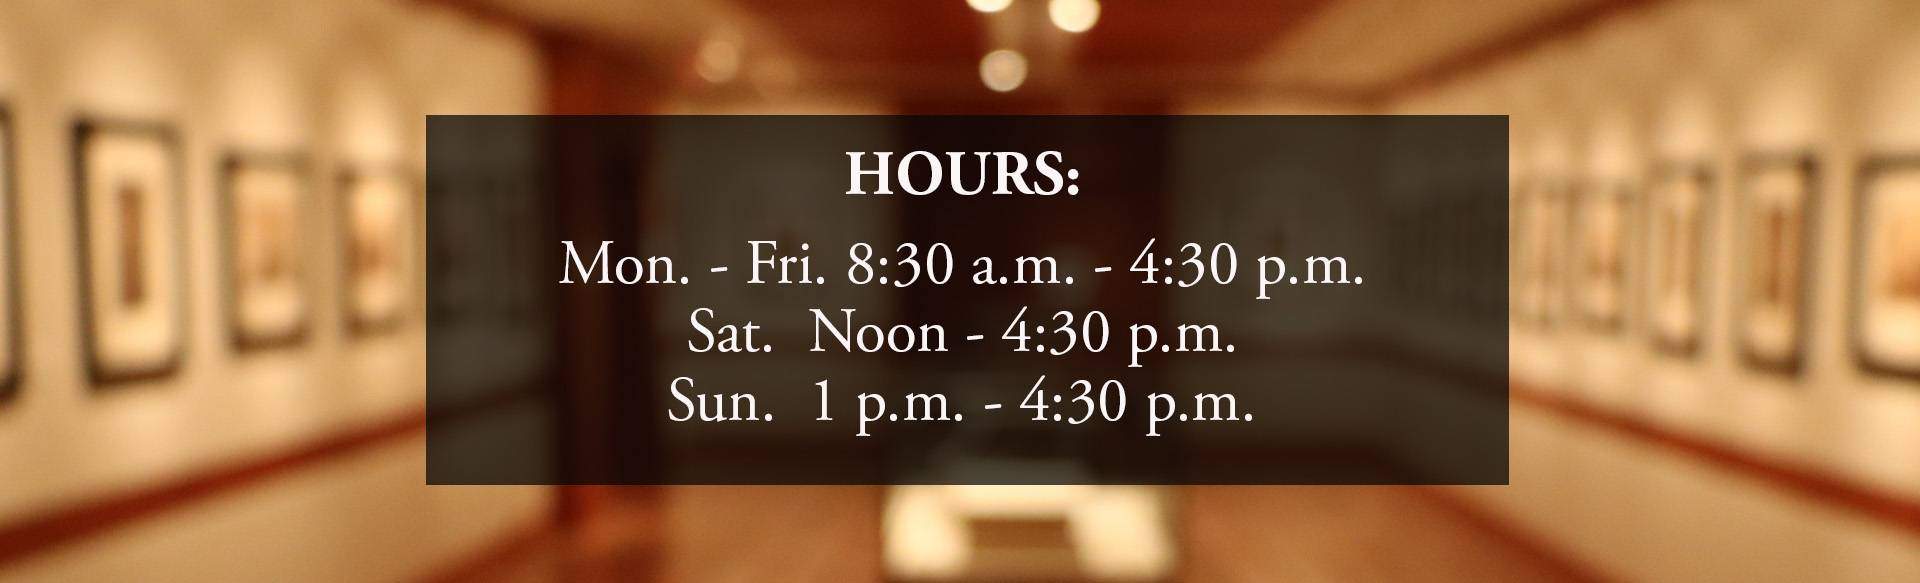 Hours: Monday through Friday 8:30 am till 4:30 pm. Saturday noon til 4:30 pm. Sunday 1 pm til 4:30 pm.